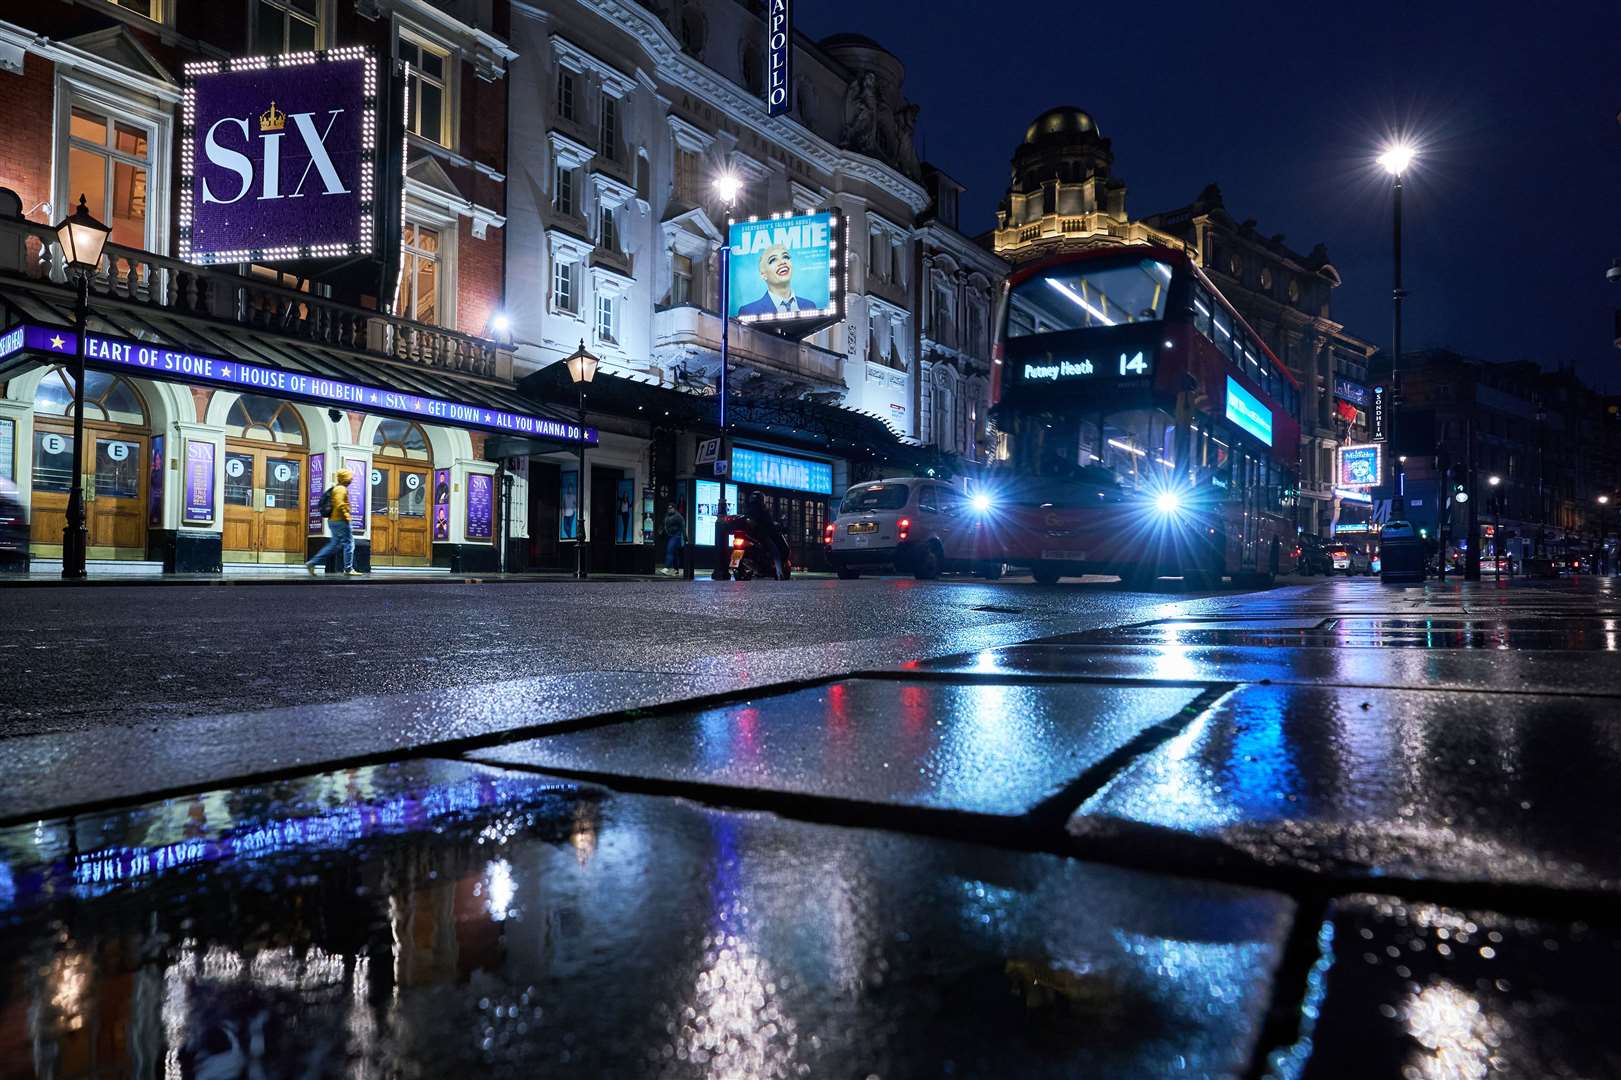 London’s theatre land has reopened after months of closure (John Walton/PA)